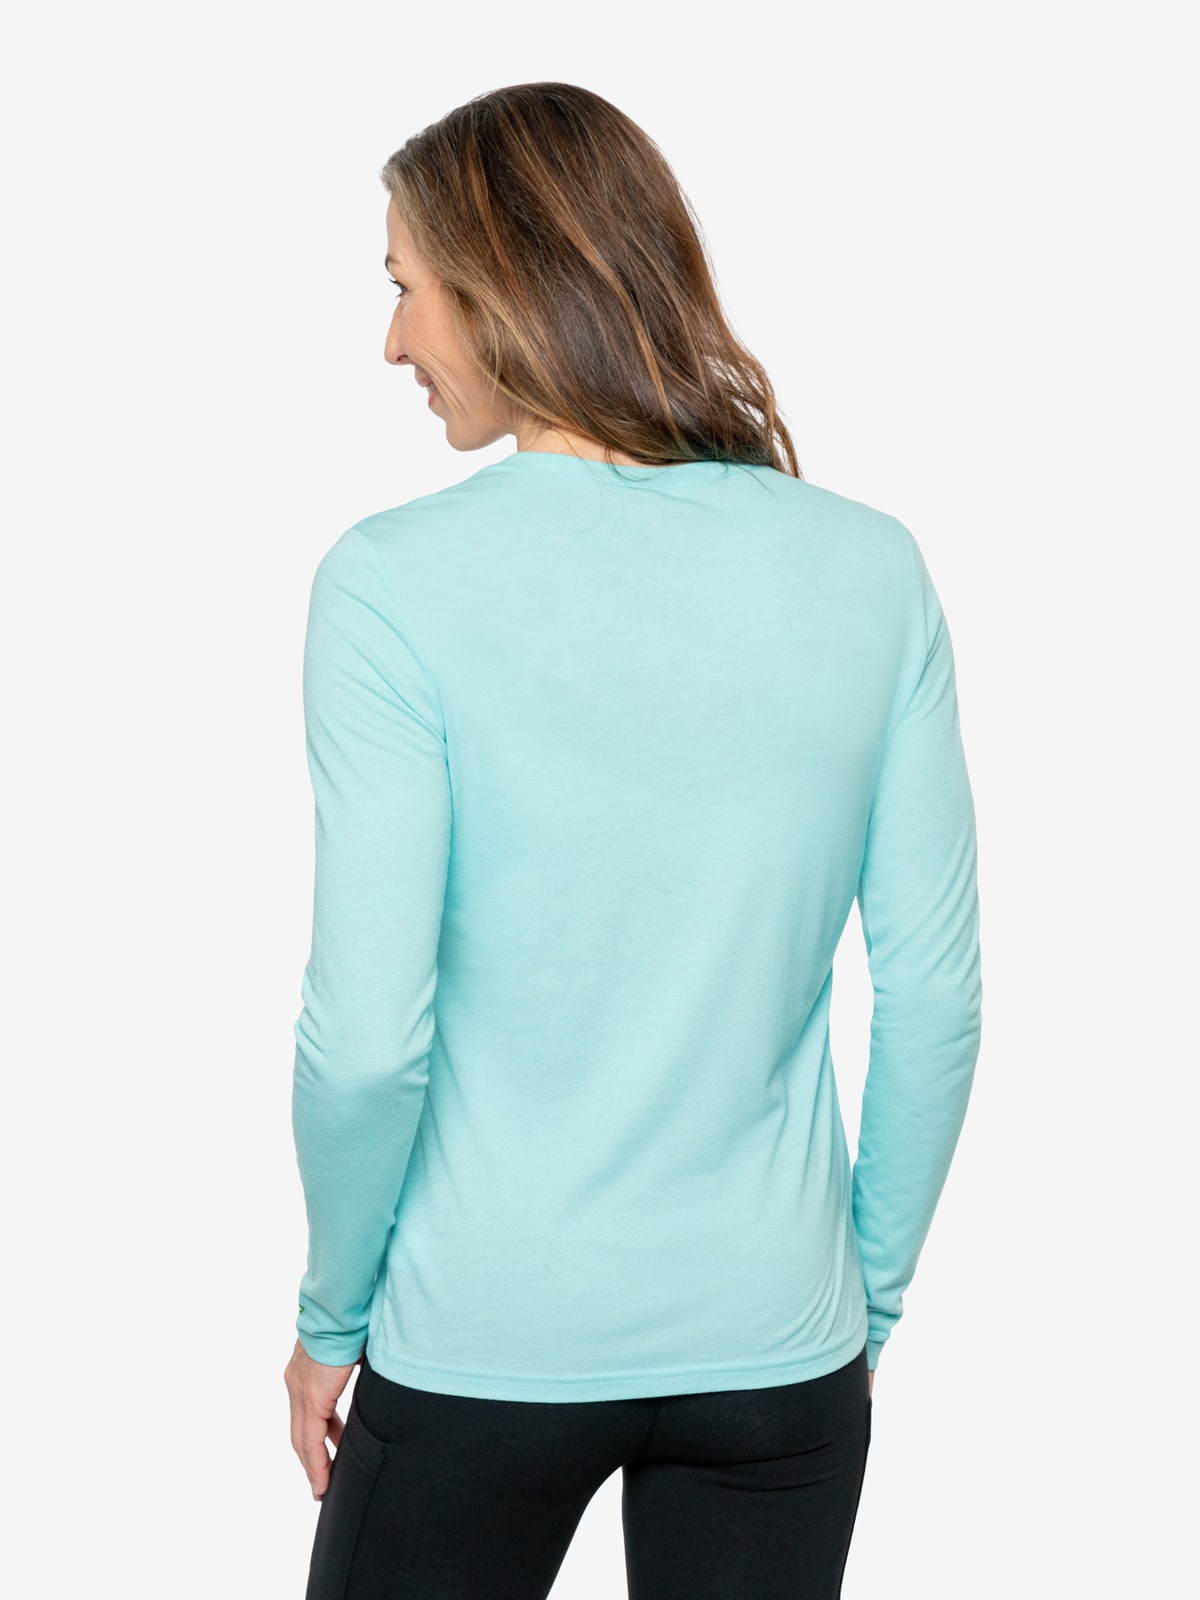 Insect Shield Women's Tri-Blend Long Sleeve T-Shirt